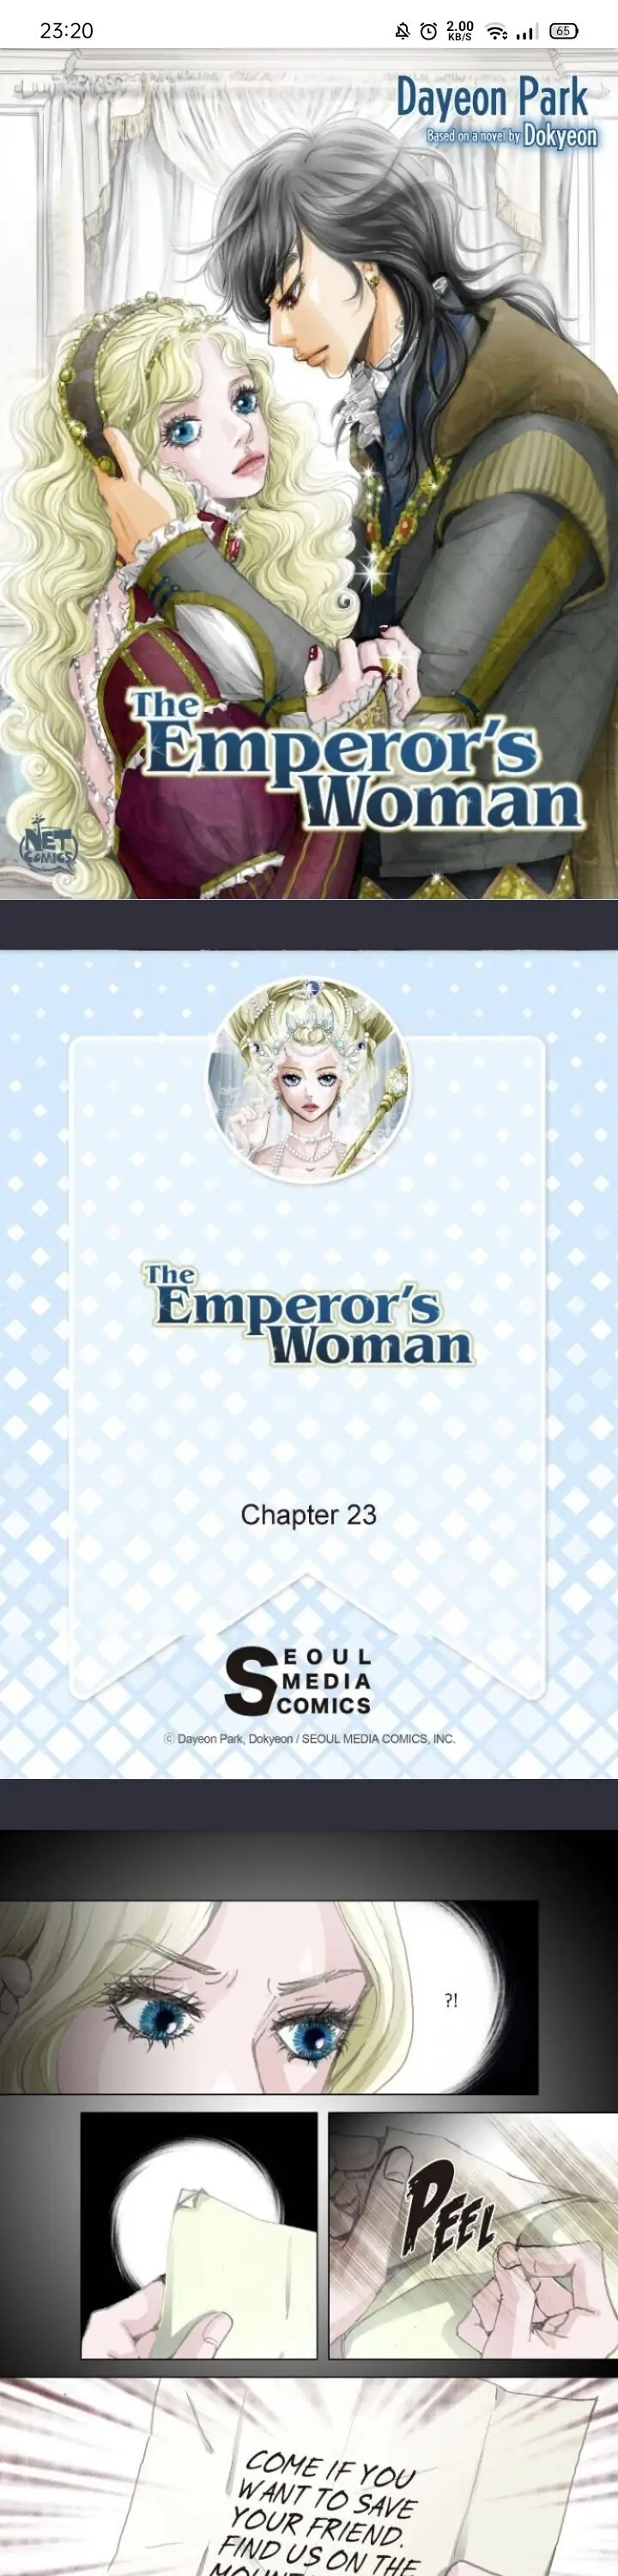 The Emperor’s Woman chapter 23